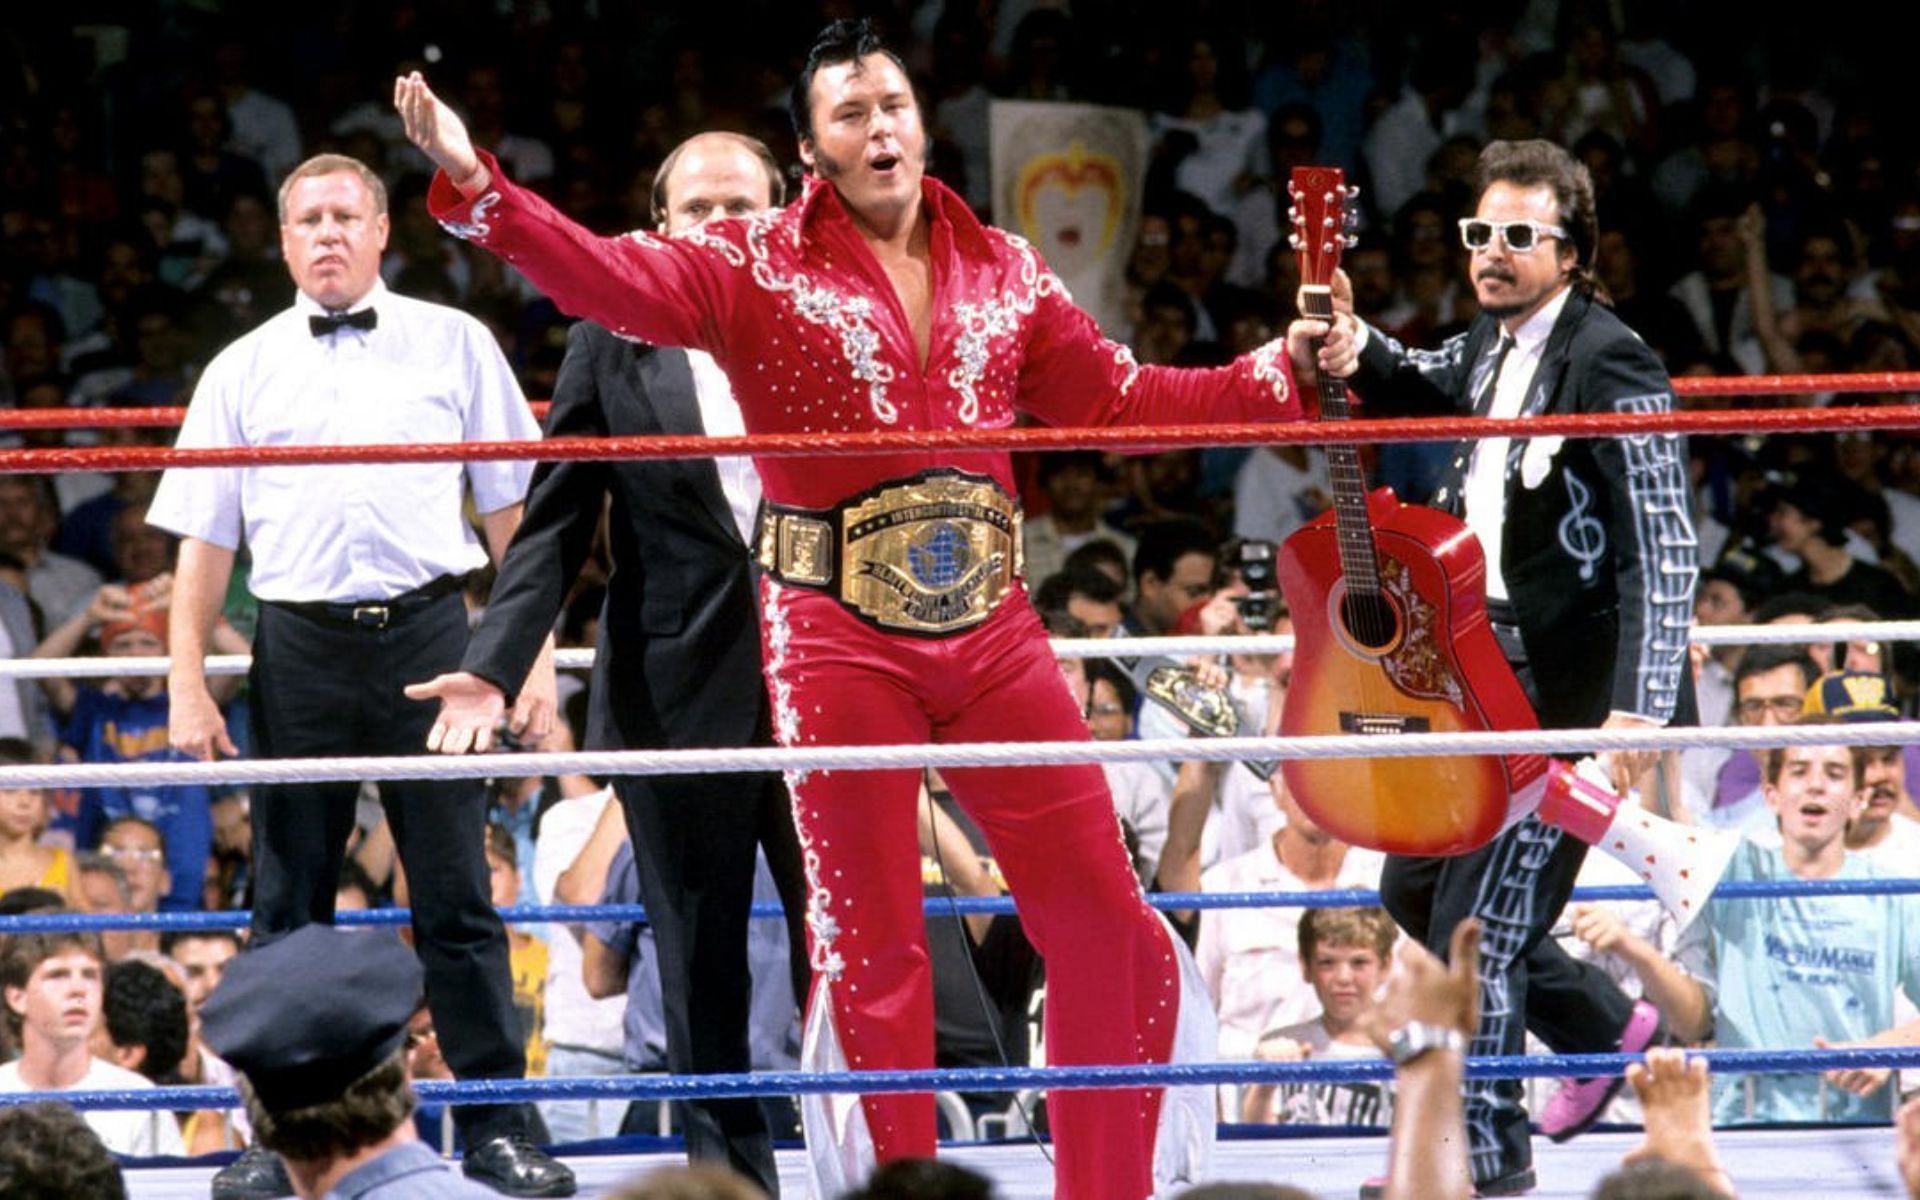 Shake, rattle, and roll...The Honky Tonk Man.